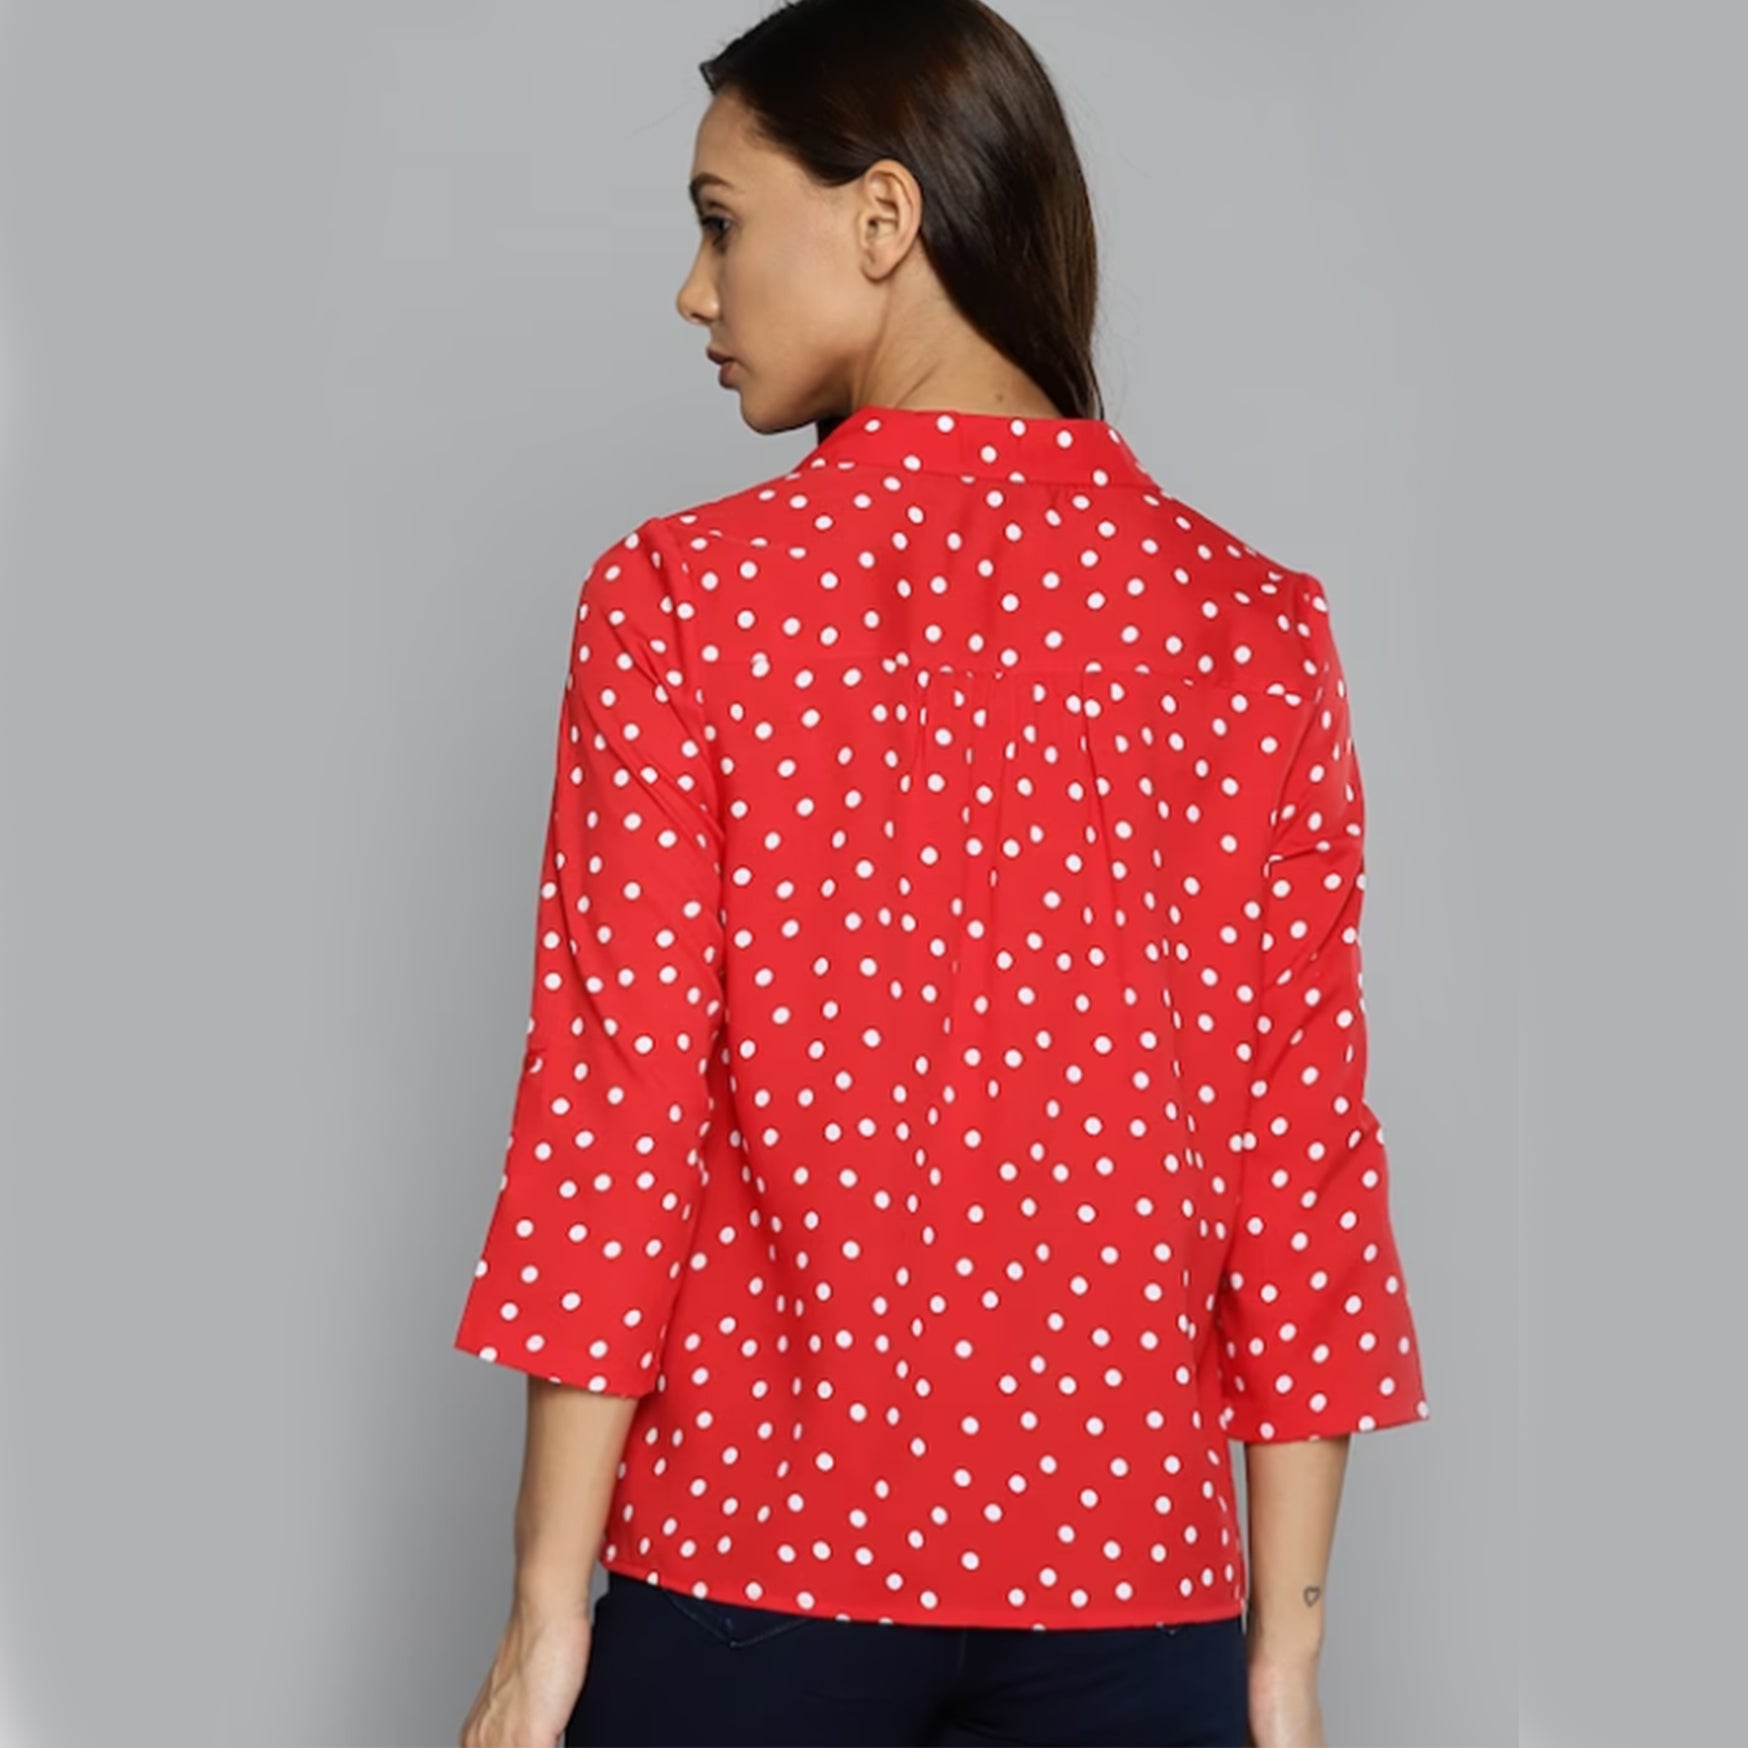 Women Red & White Polka Dot Printed Casual Shirt with Knot detail